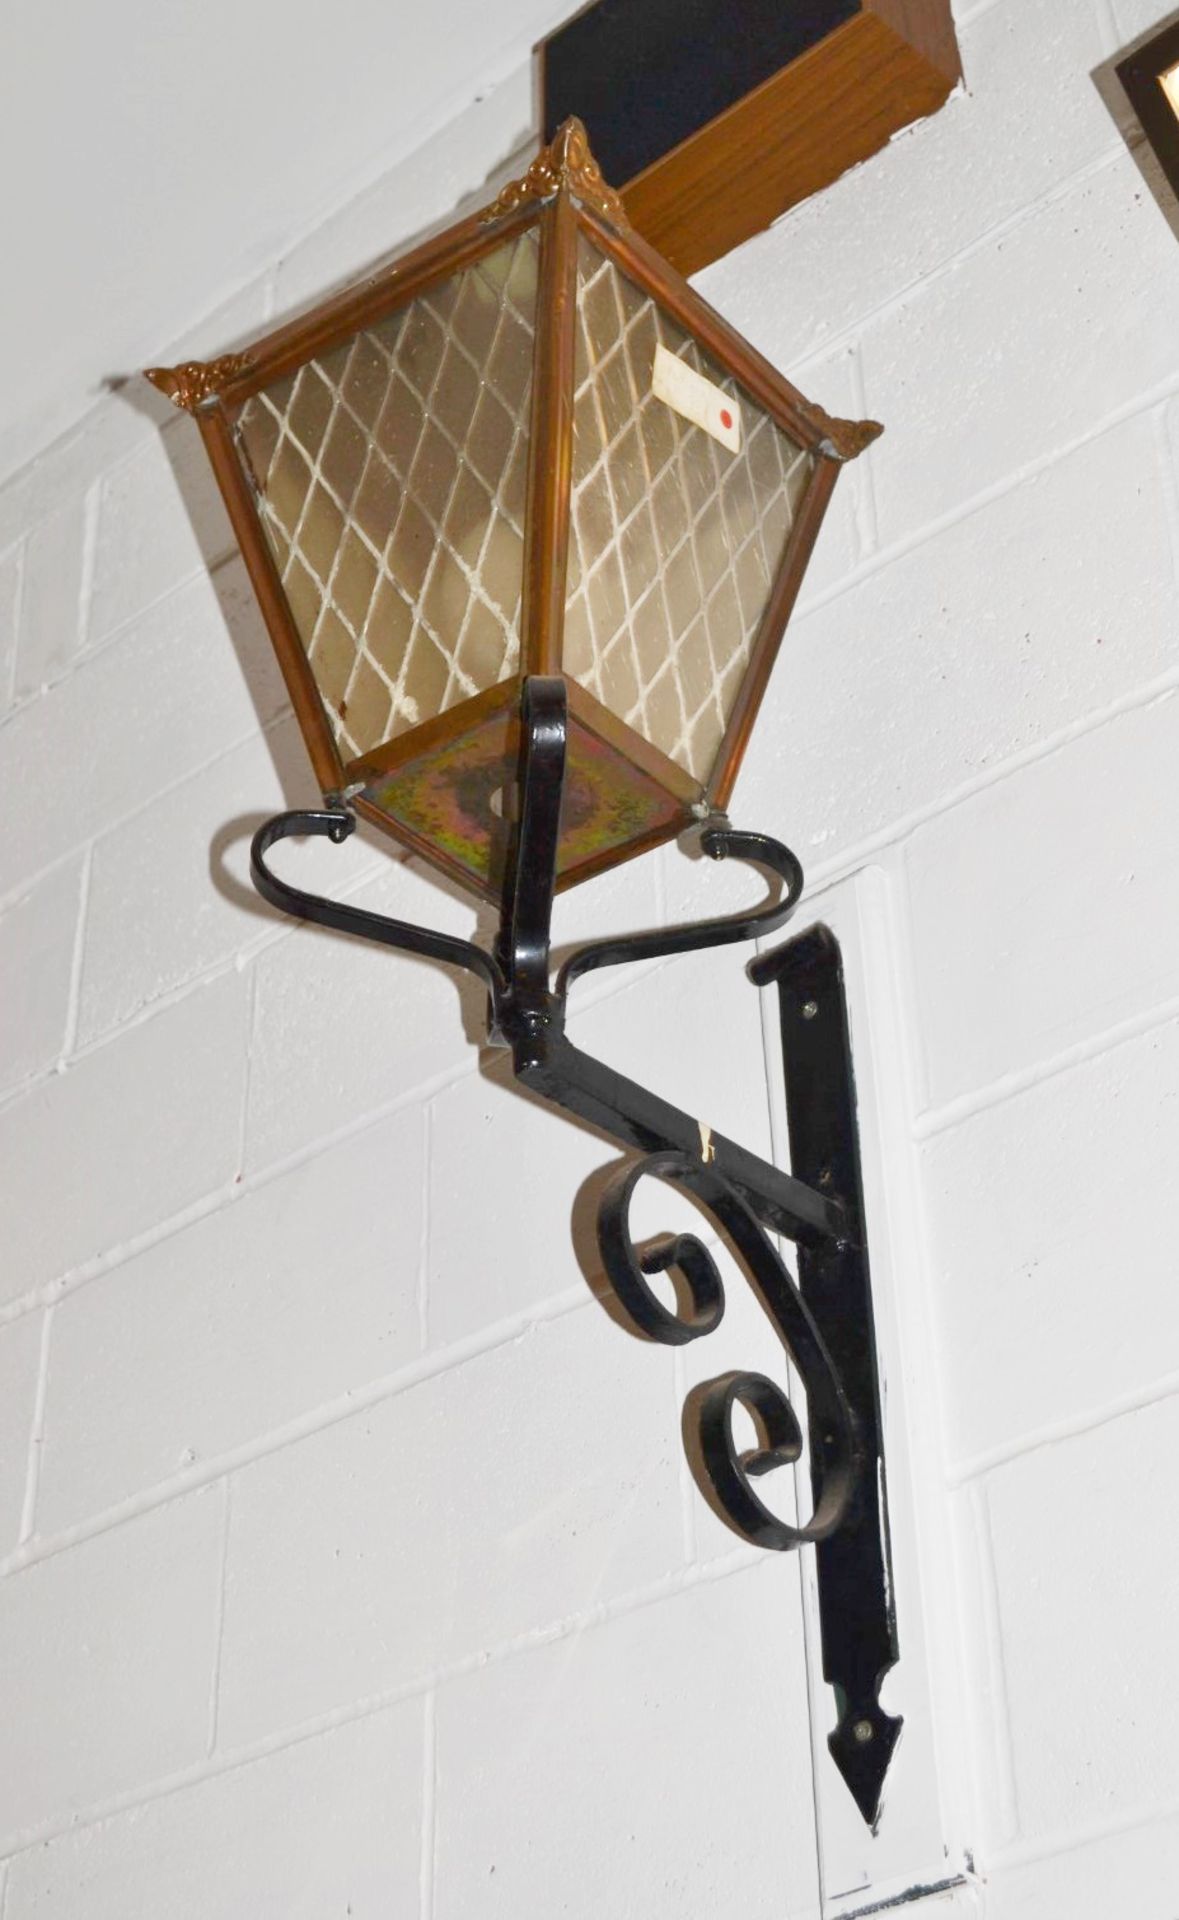 1 x Victorian Style Wall Lantern Light Fitting - Large Size in Black and Copper - Overal Height - Image 3 of 4